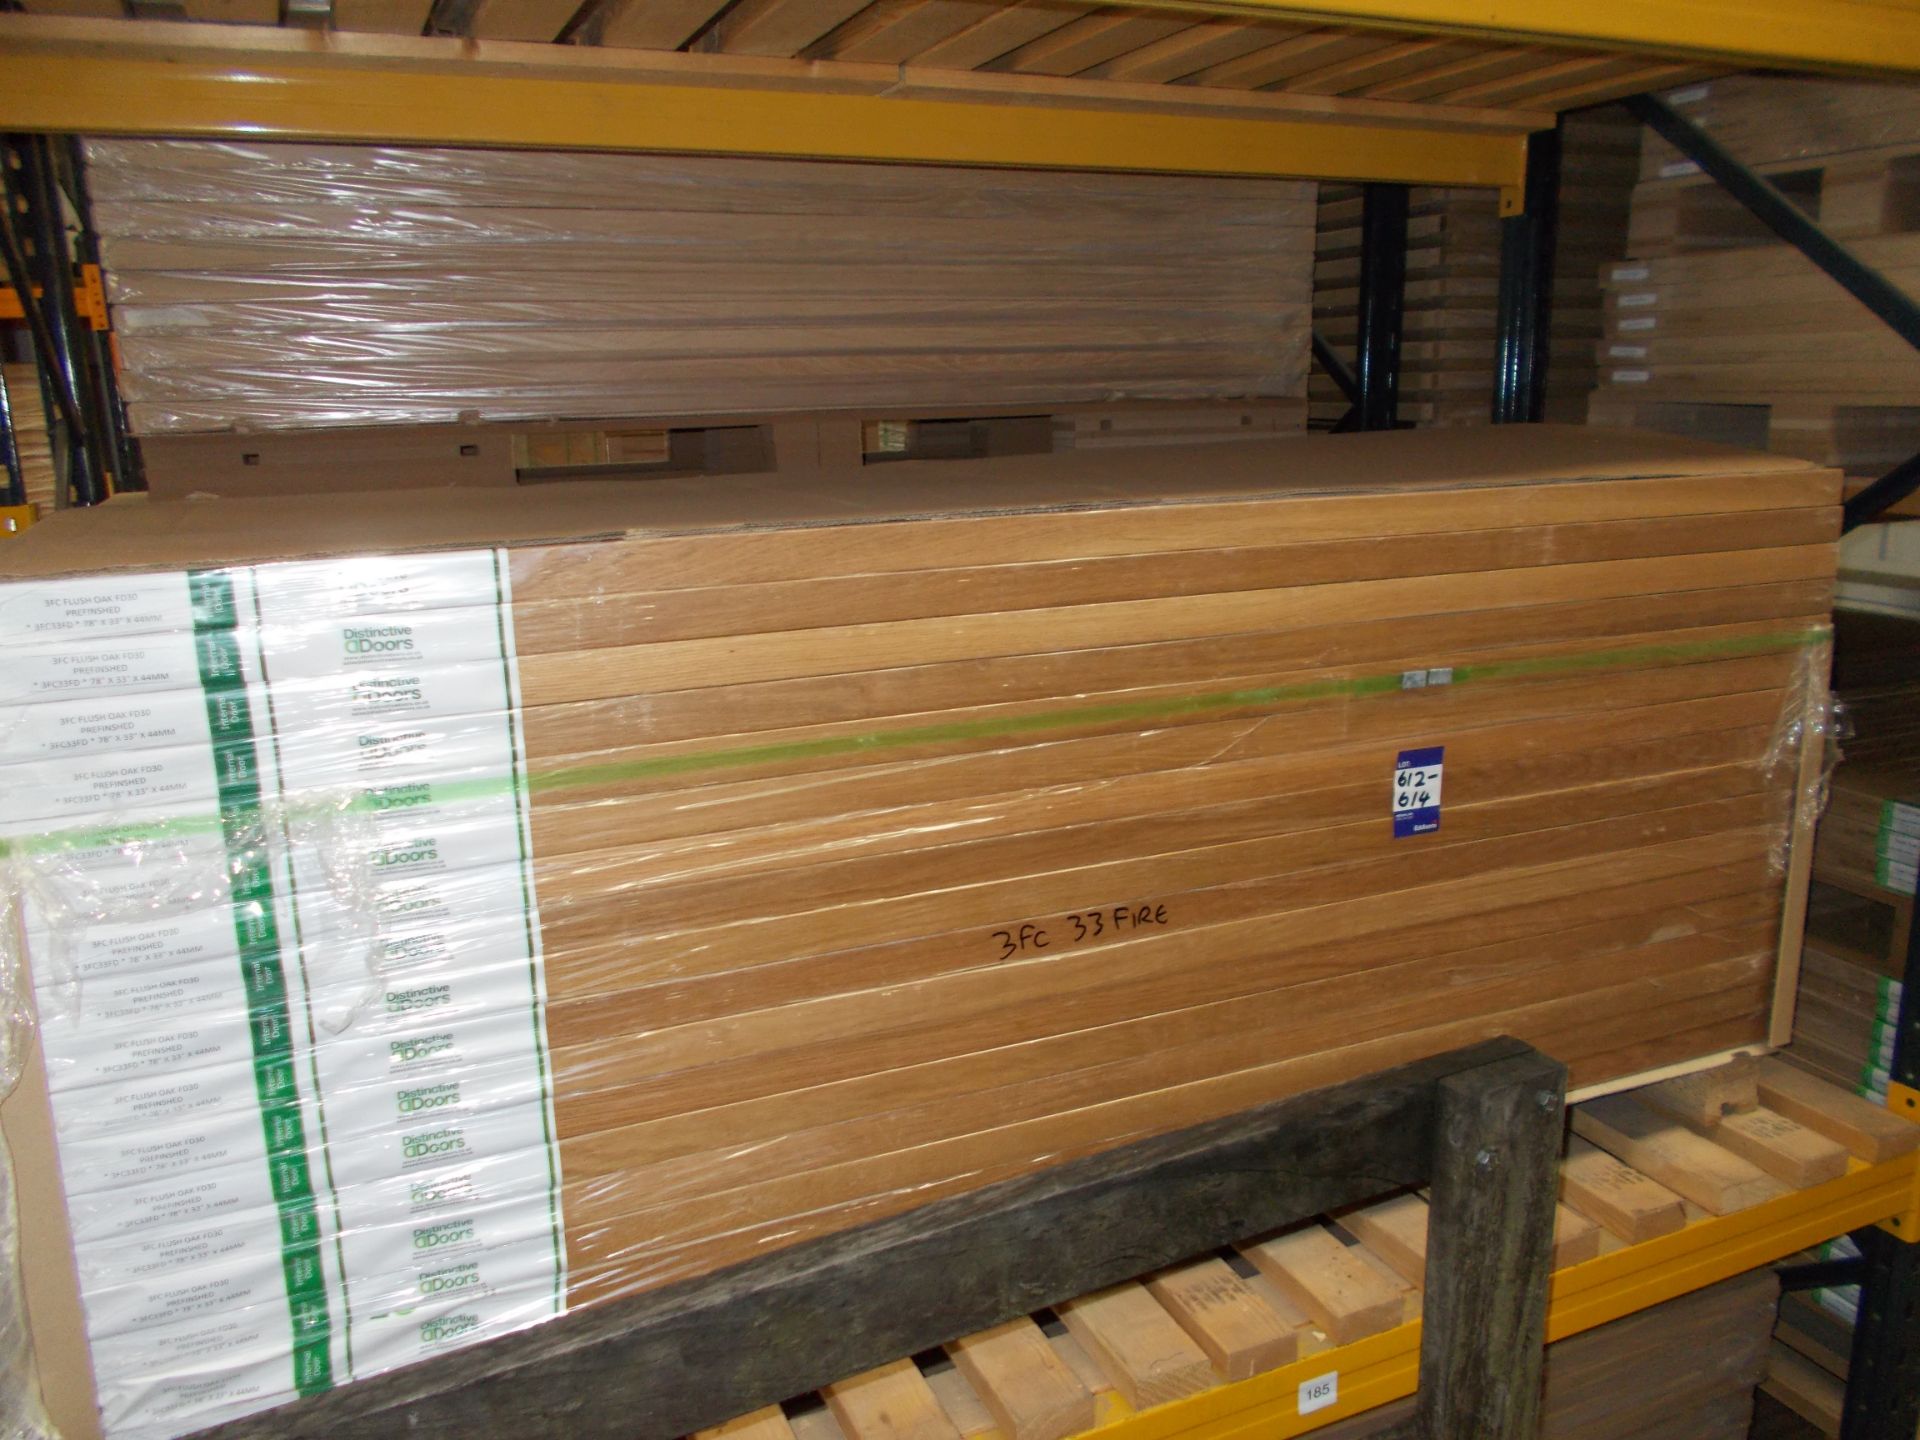 6 x 3FC Flush Oak FD30 P/F Internal, 78”X33”X44mm - Lots to be handed out in order they are stacked, - Image 2 of 3